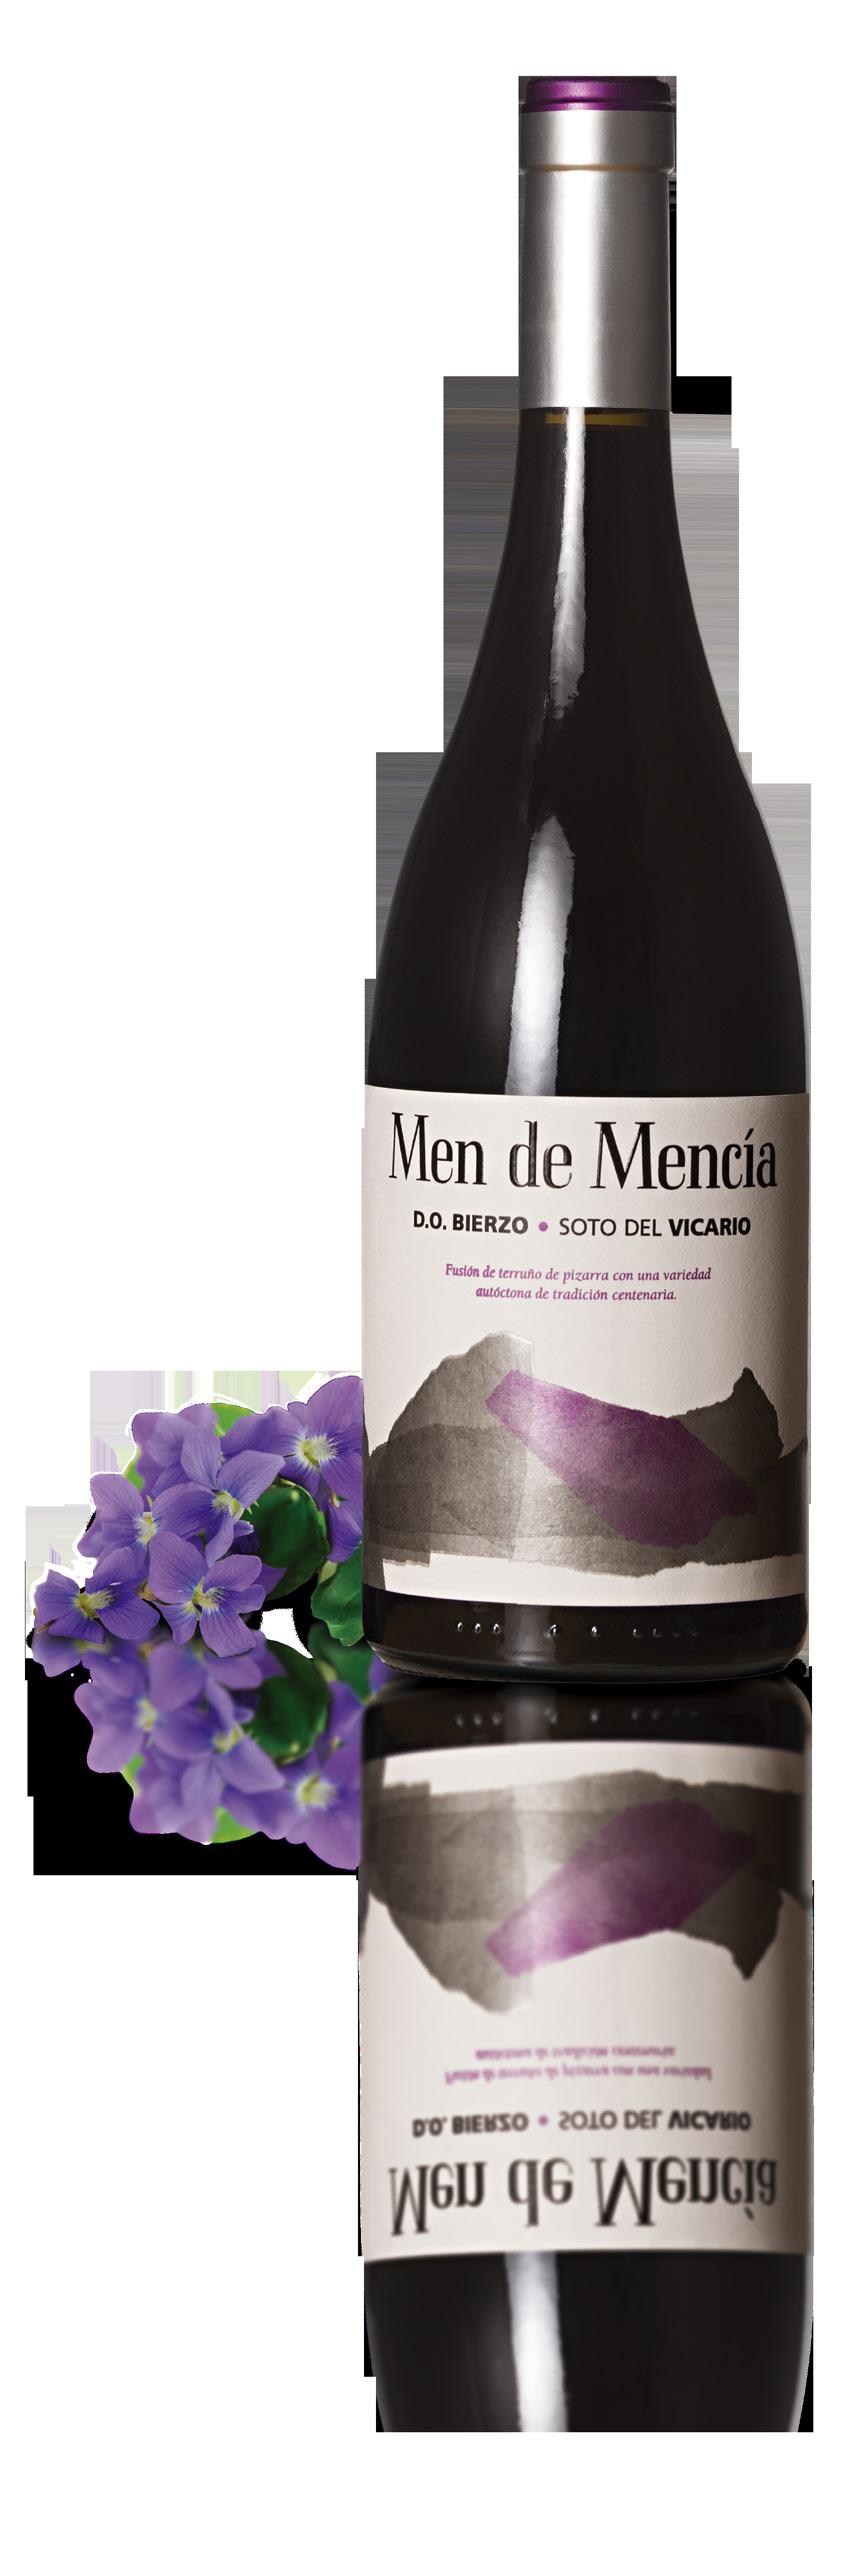 D.O. BIERZO MEN DE MENCIA (100% Mencia) Grapes harvested on the 27th, 28th and 29th of September and the 3rd and 4th of October, 2012. Red wine produced from 100% Mencia grapes.